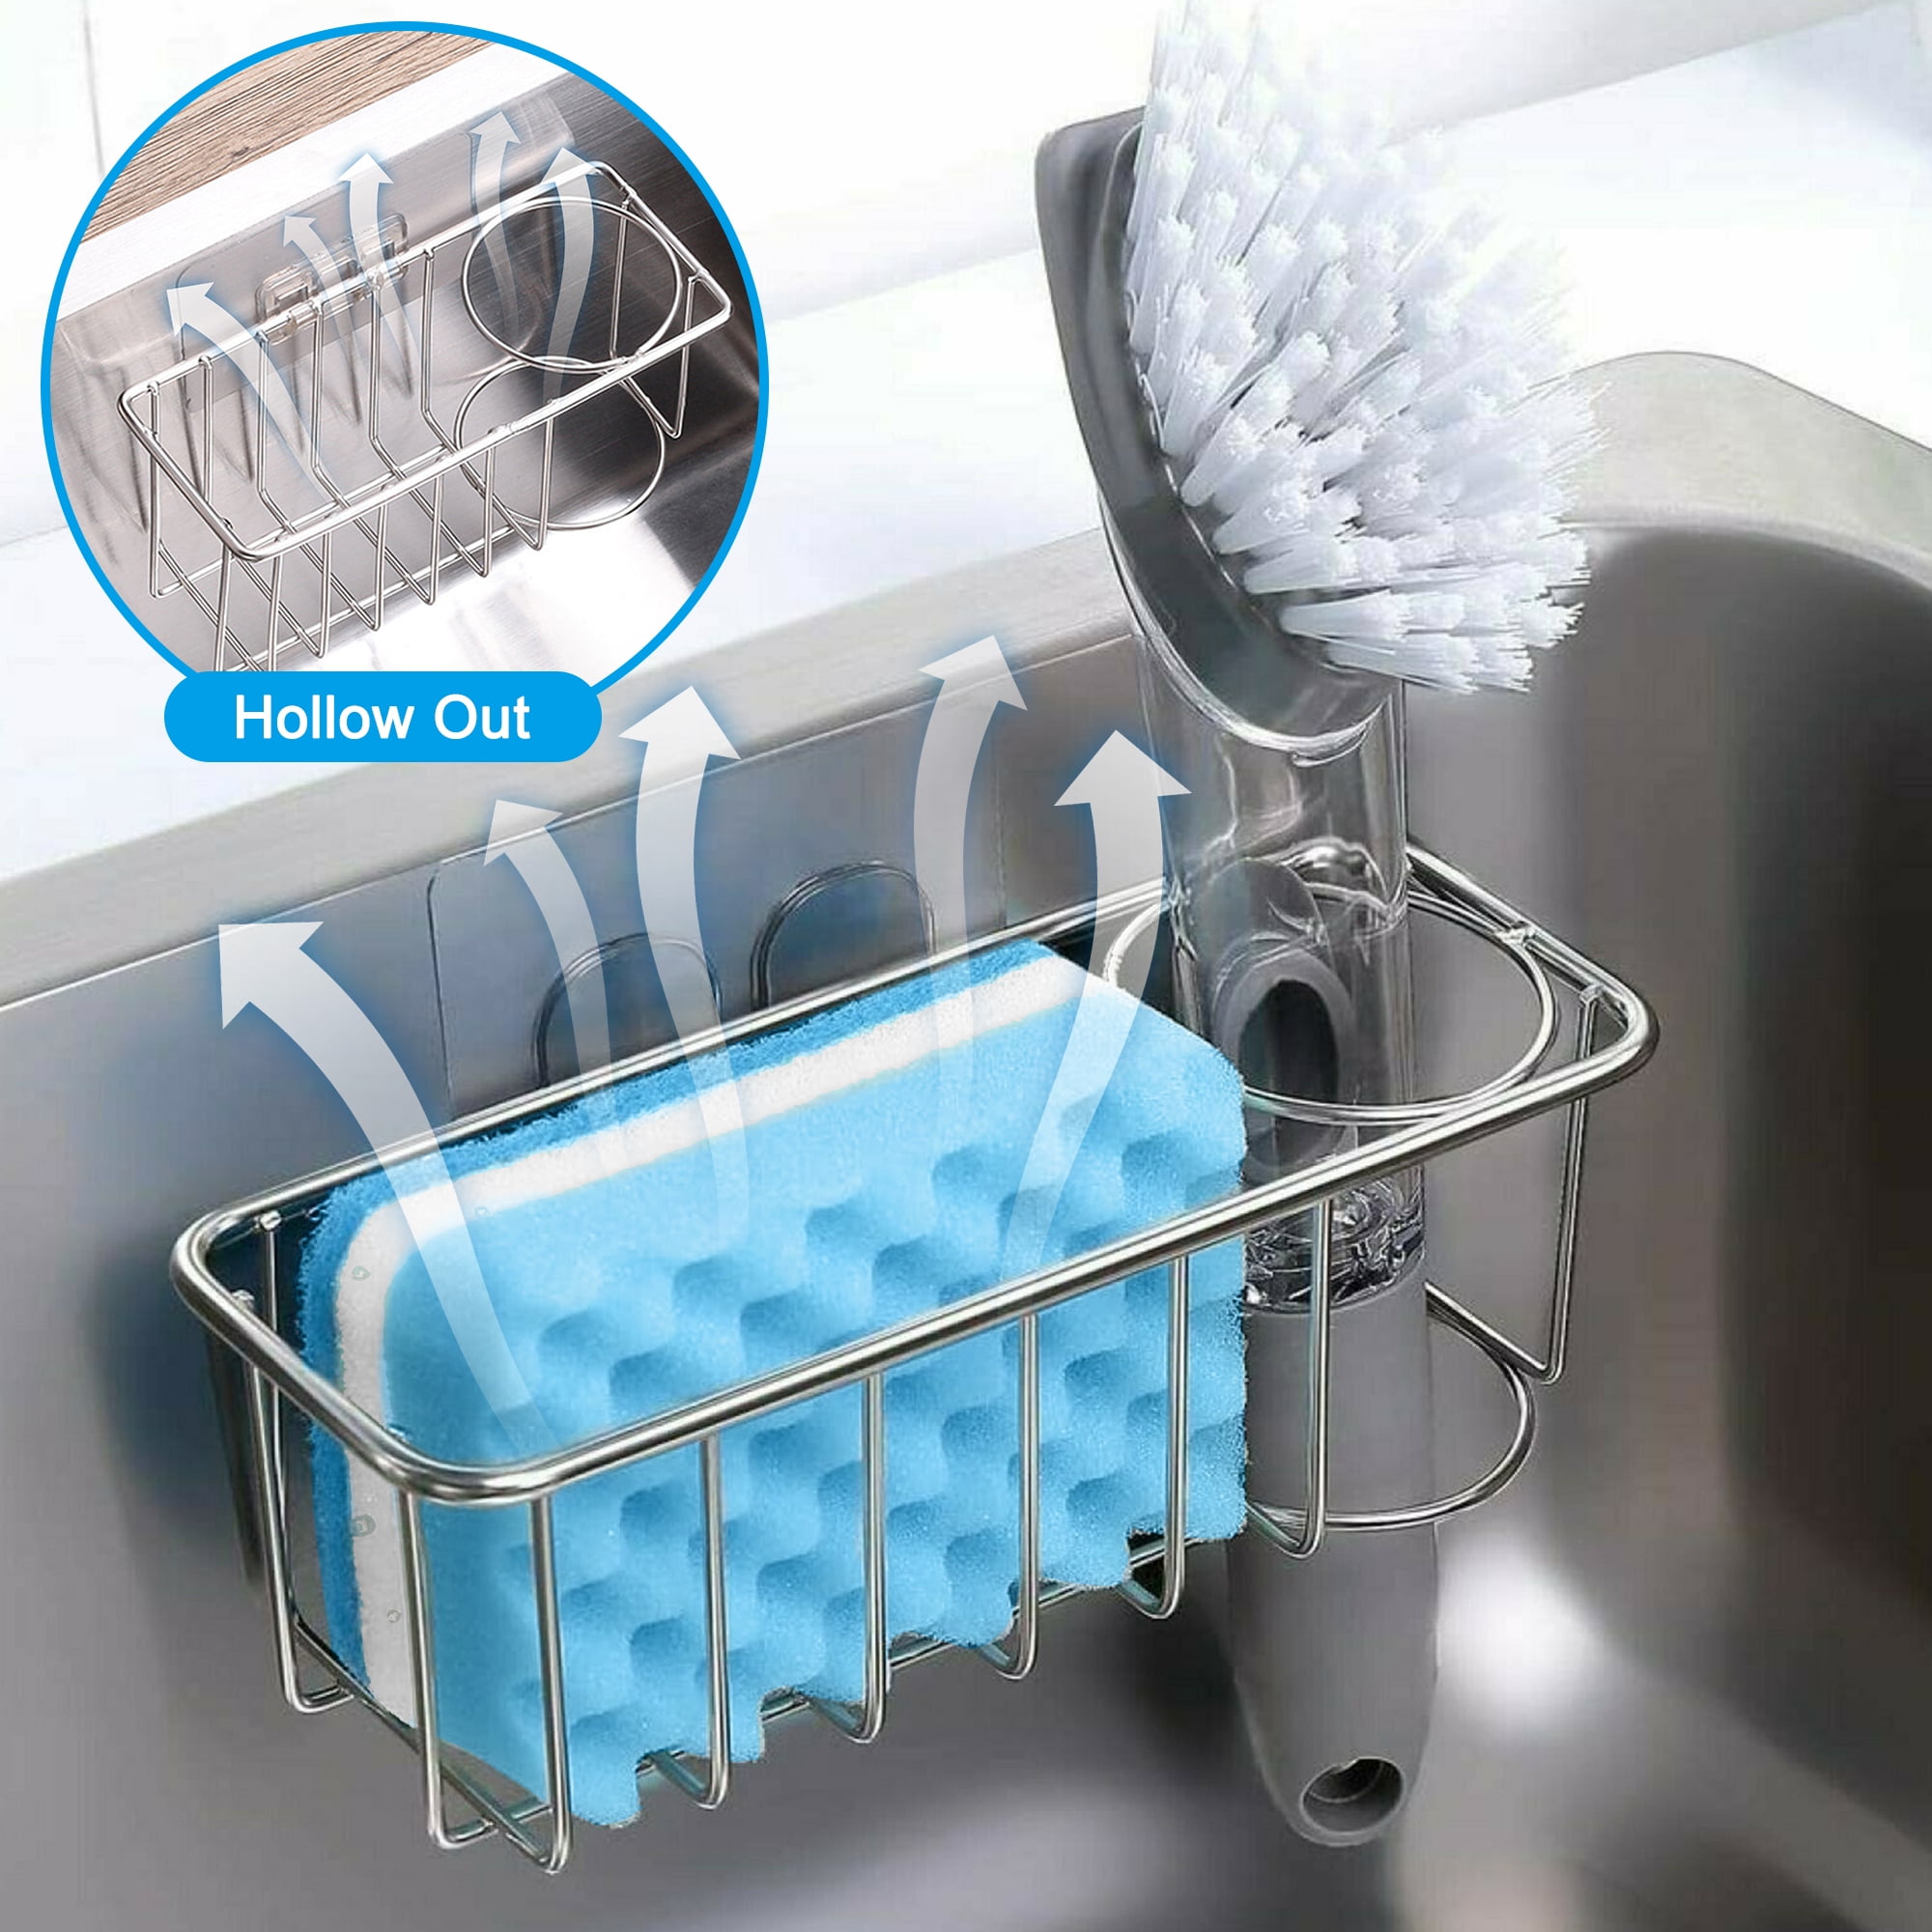 Aoibox 1 Pack Gray Sponge Holder for Kitchen Sink Adhesive Sponge Caddy Shower Shelf with Hooks Stuck No Drilling